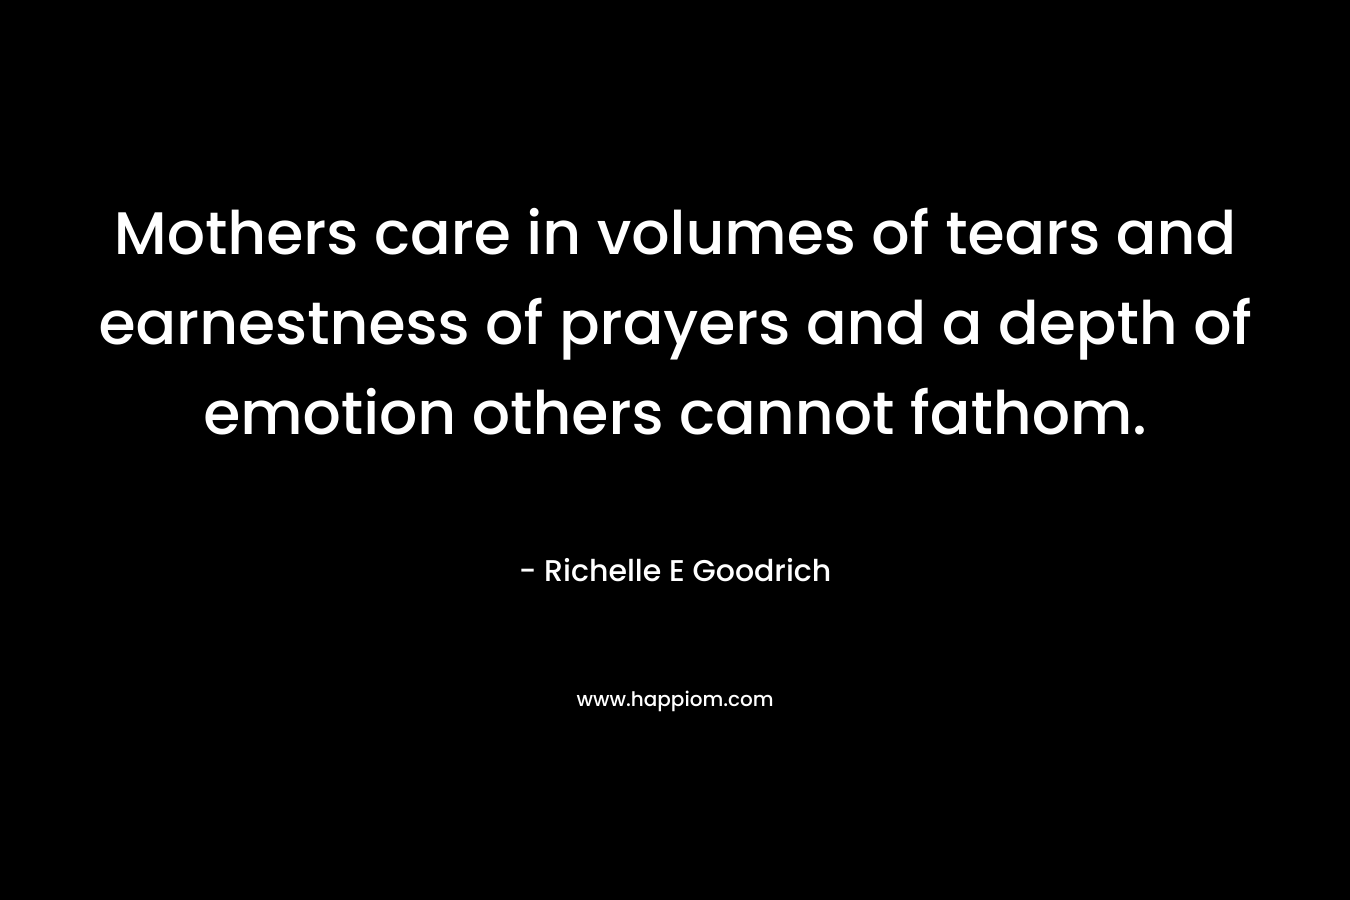 Mothers care in volumes of tears and earnestness of prayers and a depth of emotion others cannot fathom. – Richelle E Goodrich